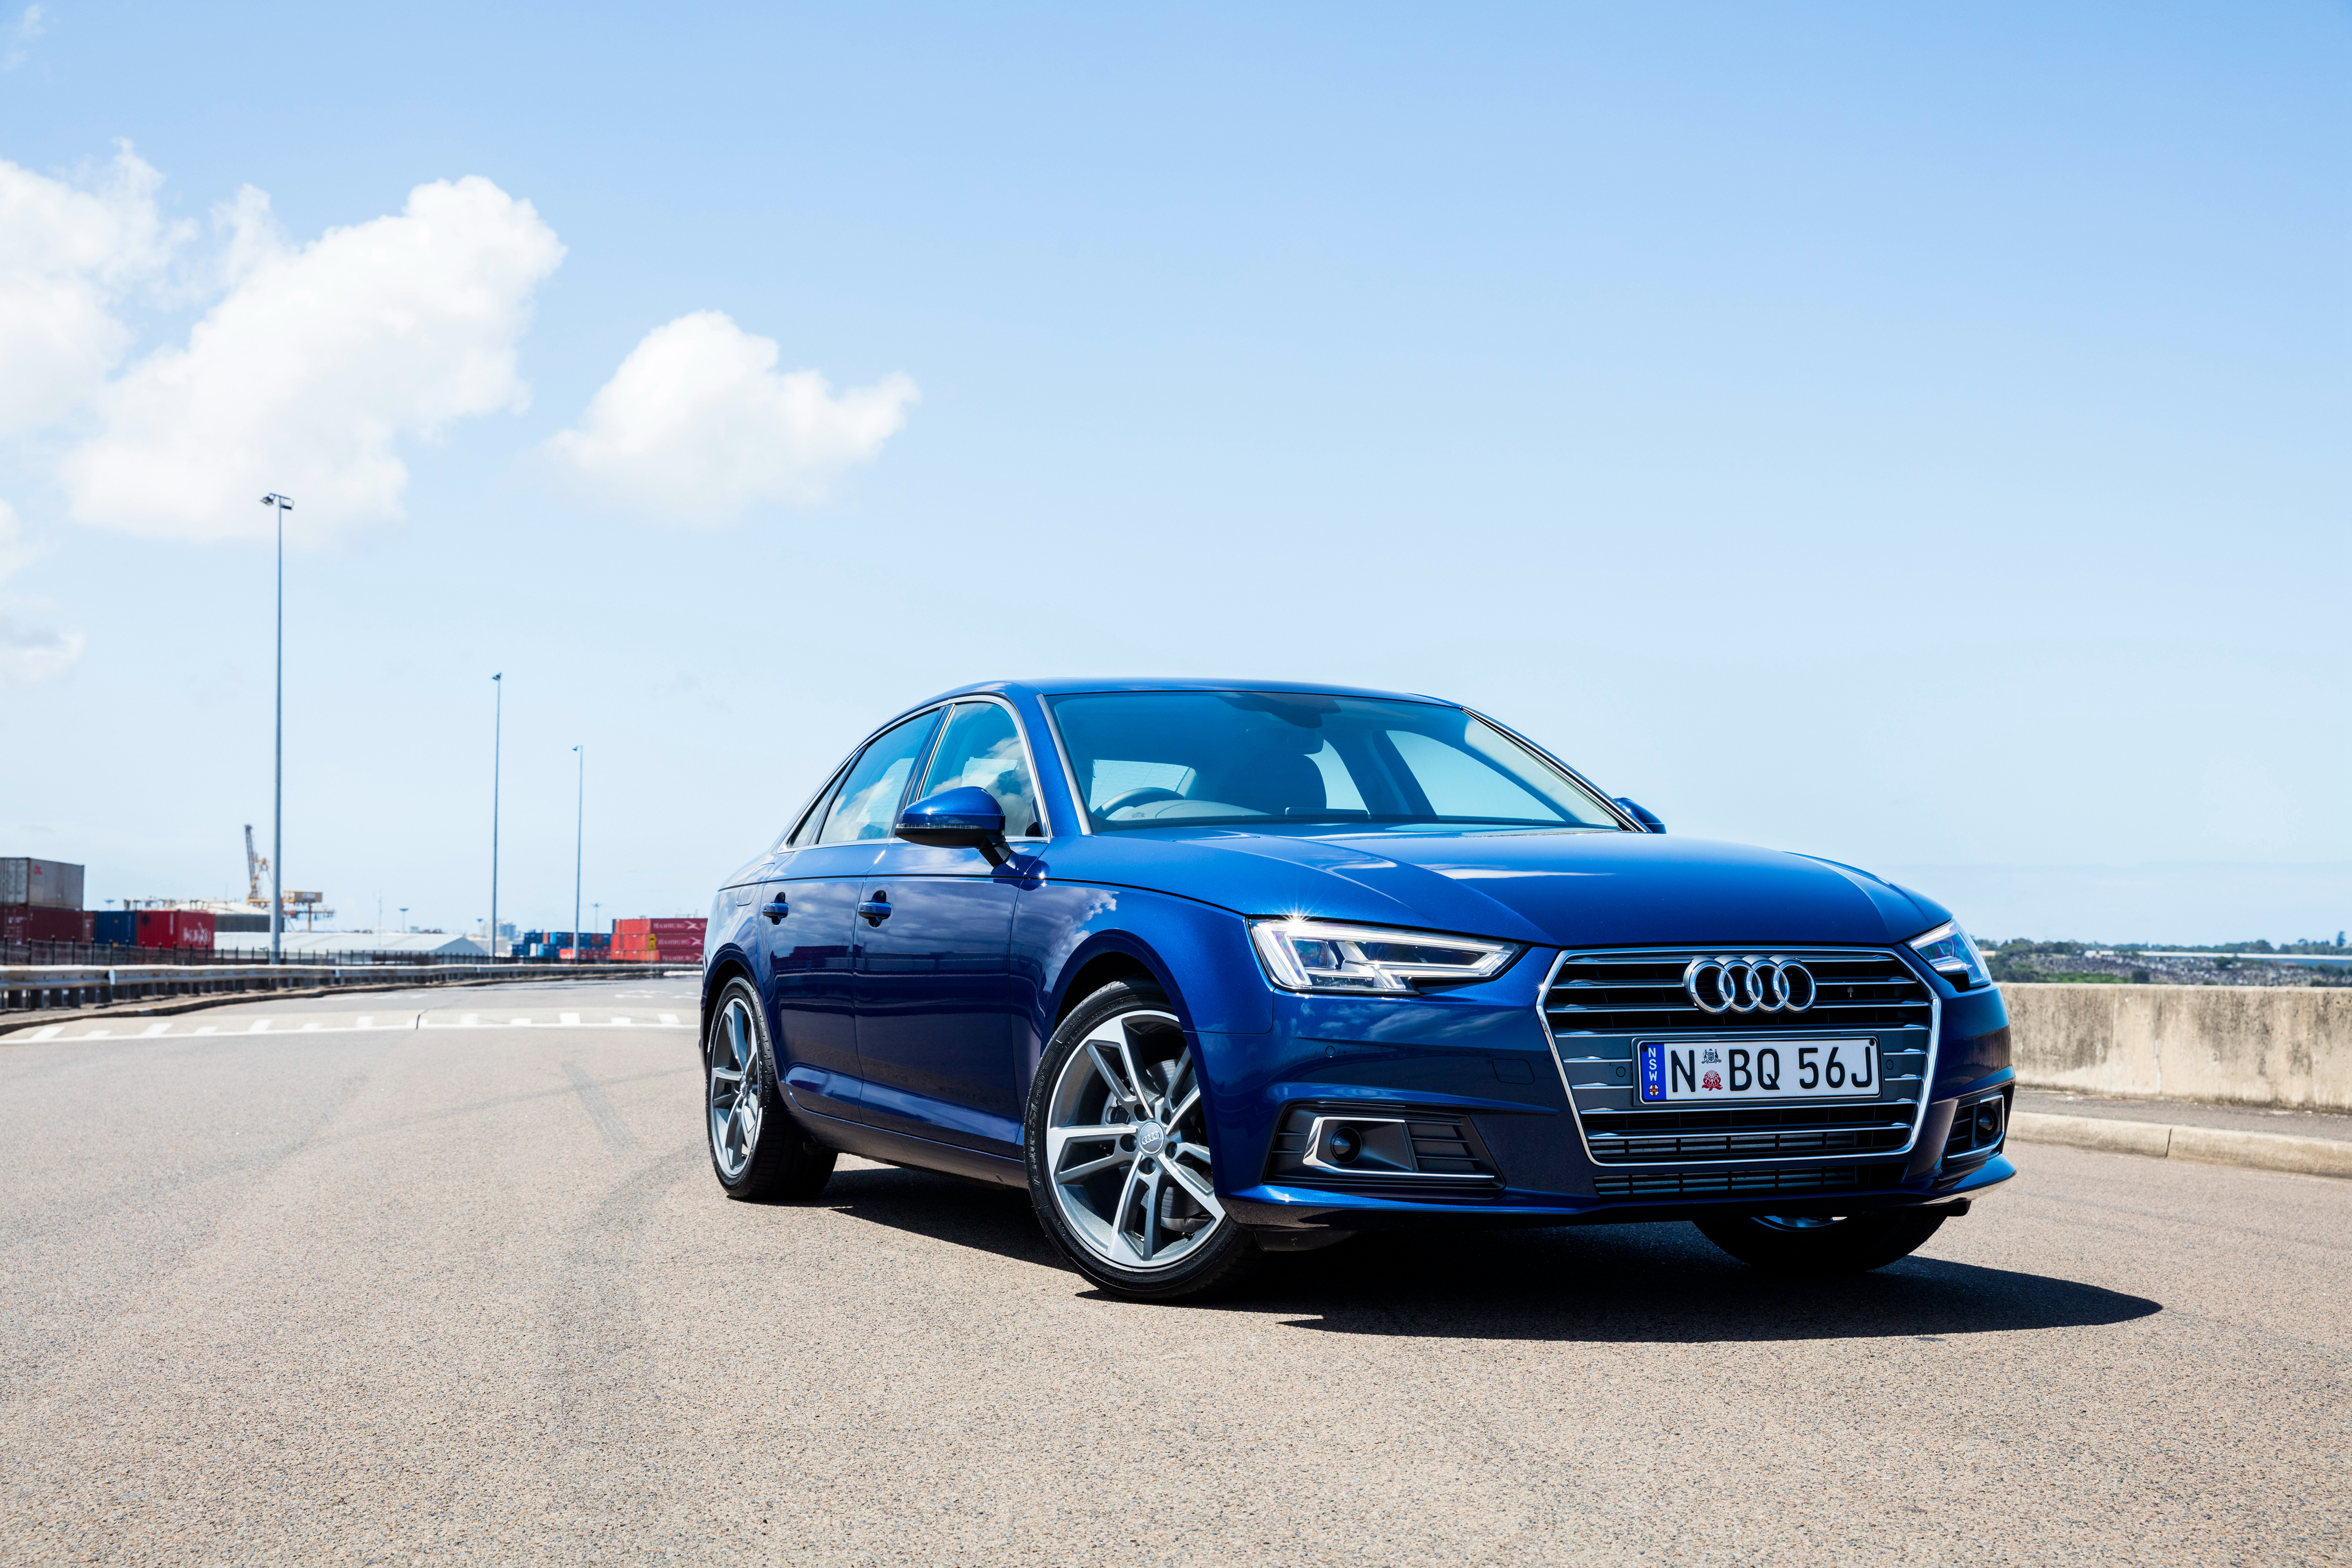 Audi A4 2019 Wallpapers